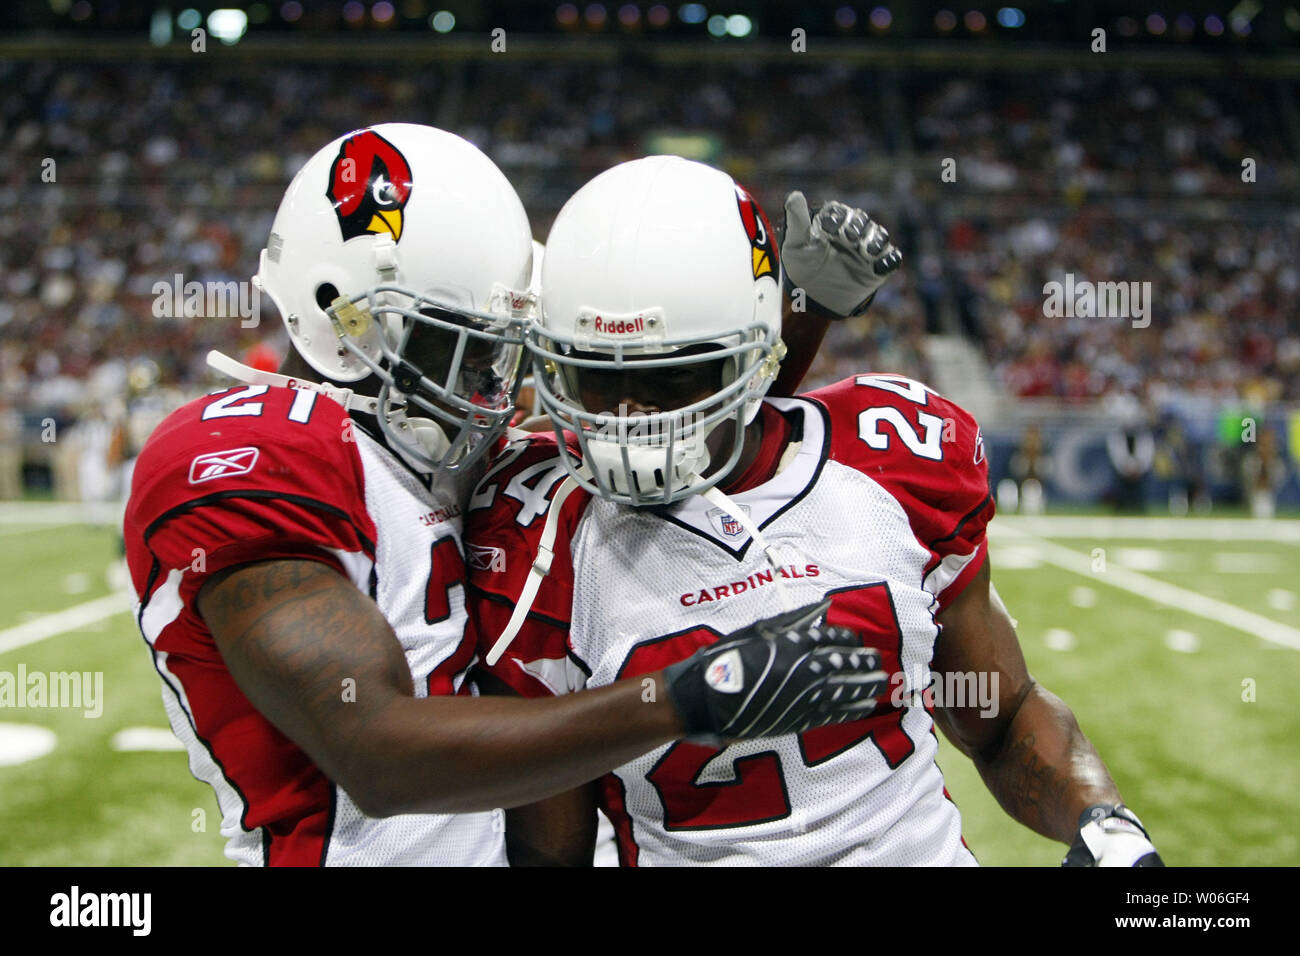 Arizona Cardinals Antrel Rolle (L) celebrates his interception run back for a touchdown with teammate Adrian Wilson in the second quarter against the St. Louis Rams at the Edward Jones Dome in St. Louis on November 2, 2008. Arizona won the game 31-13. (UPI Photo/Bill Greenblatt) Stock Photo